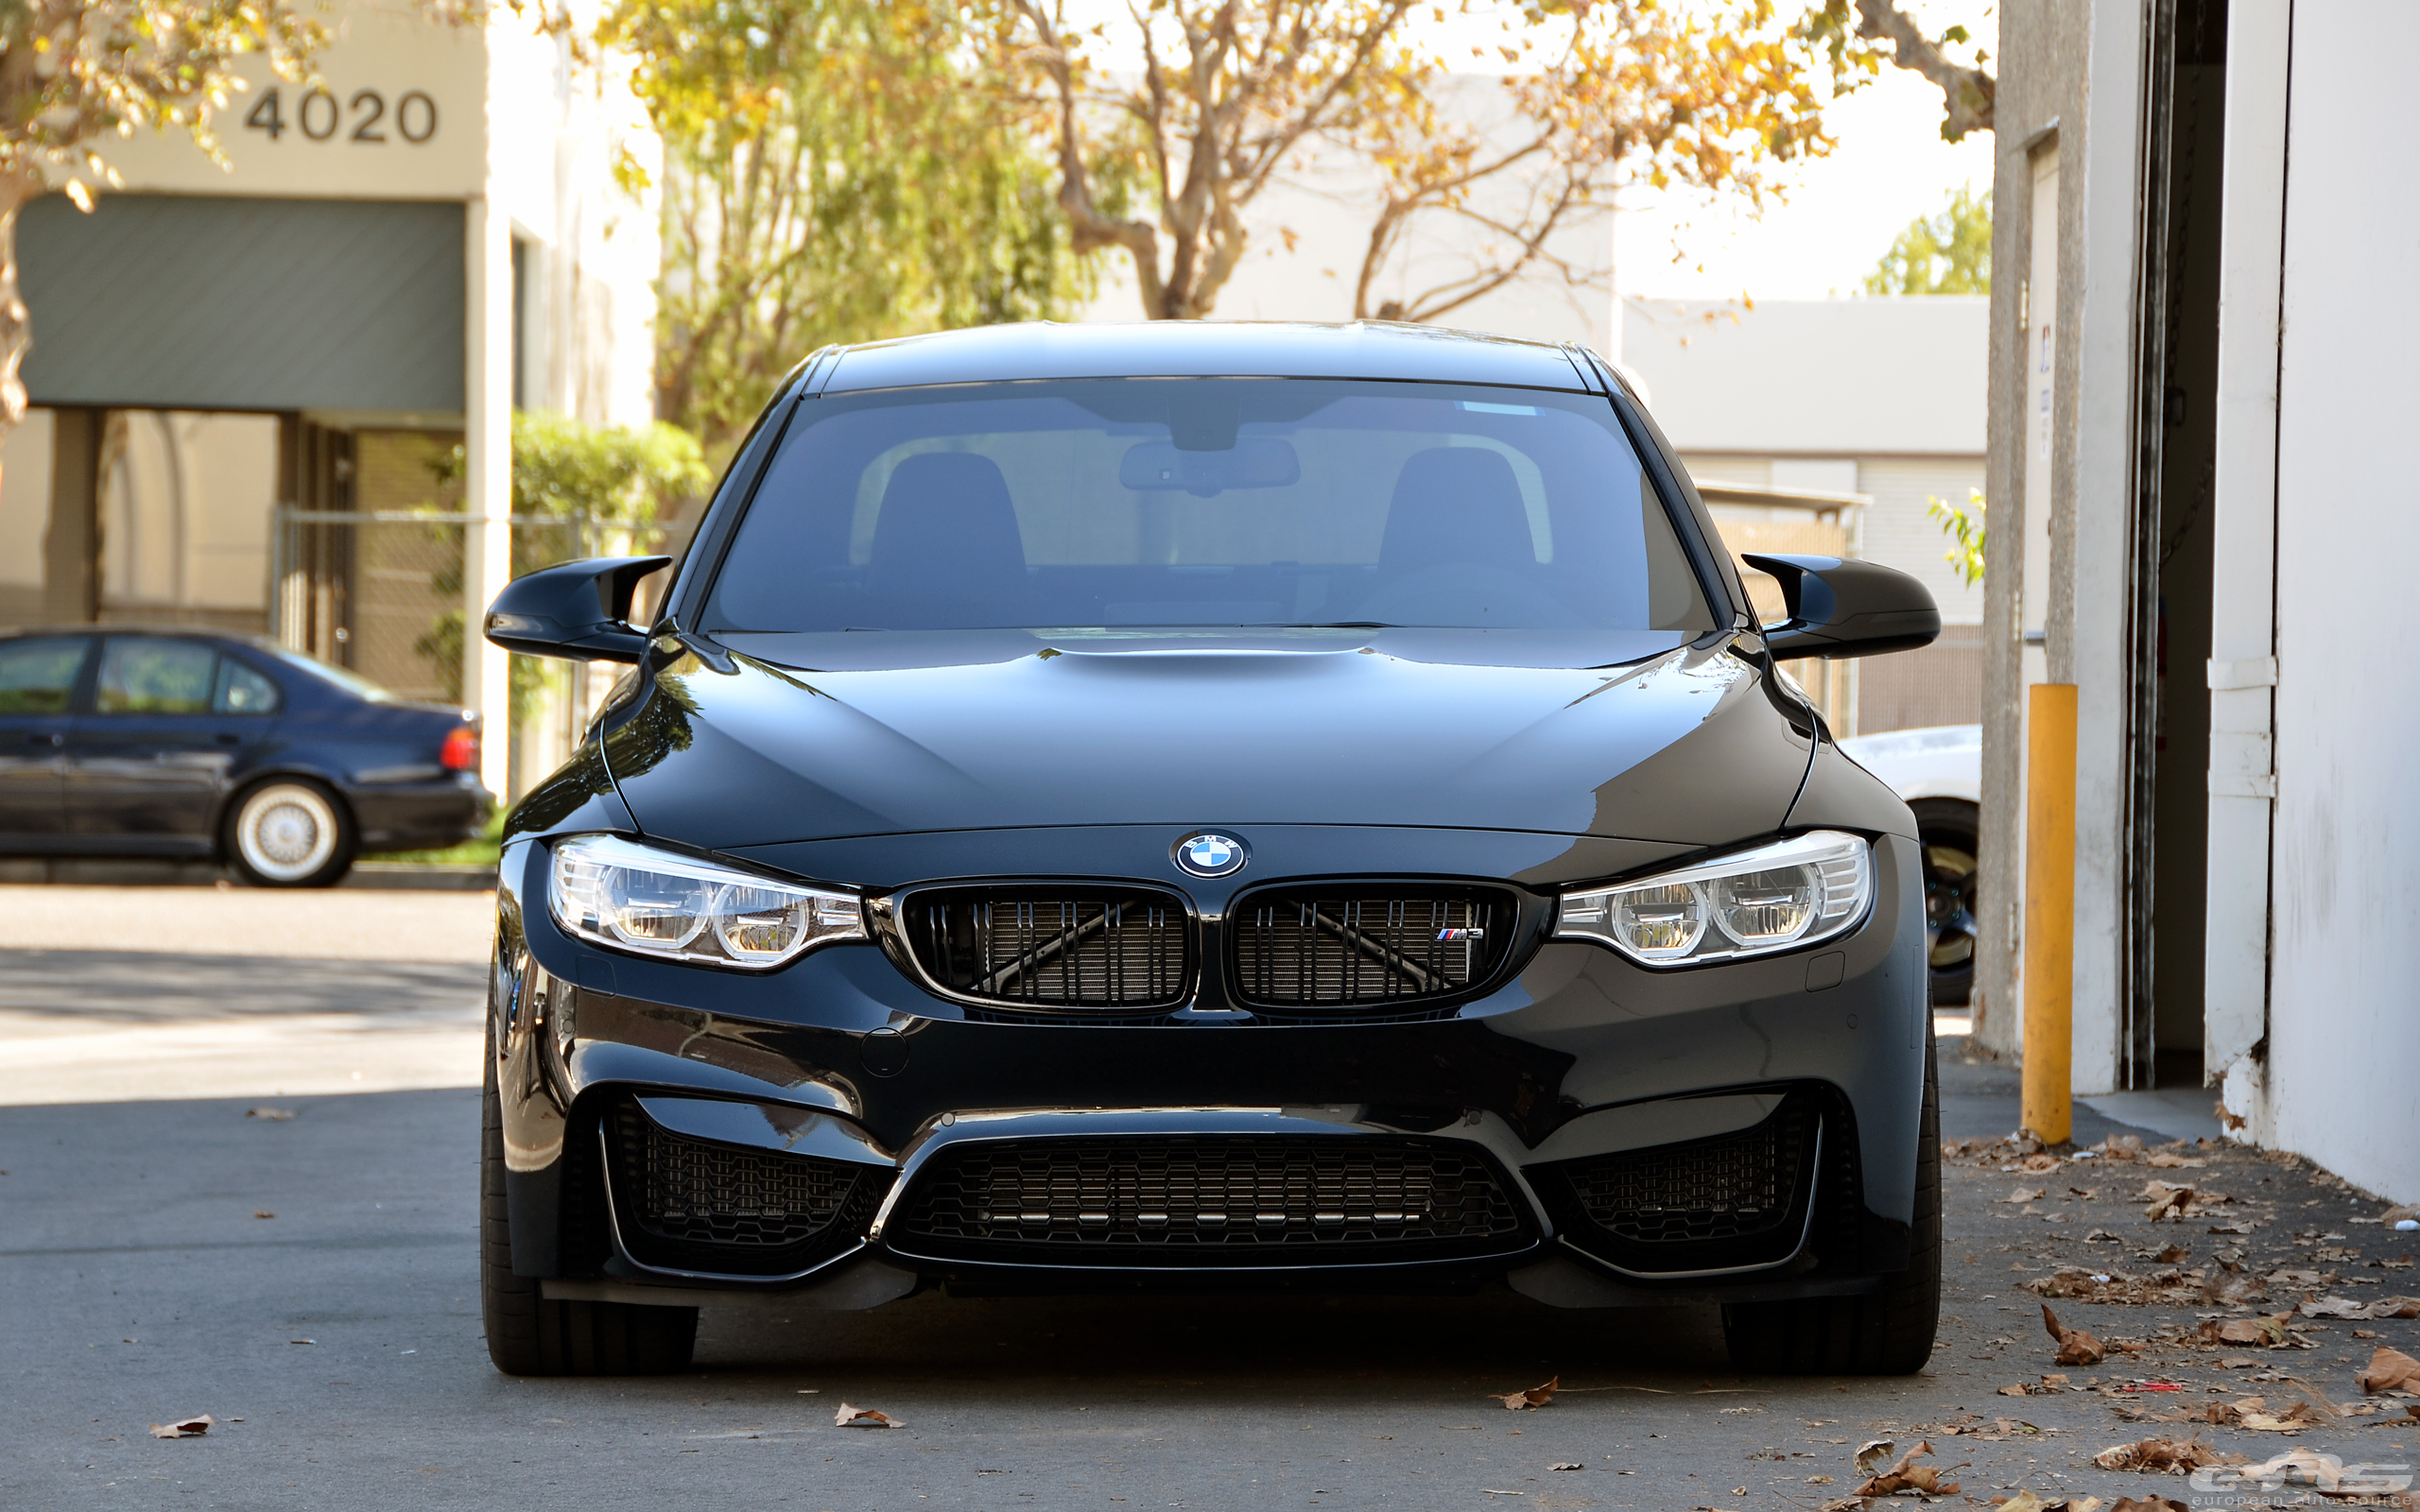 Modifications: BMW Gloss Black Kidney Grille Surrounds BMW M Performance Ca...